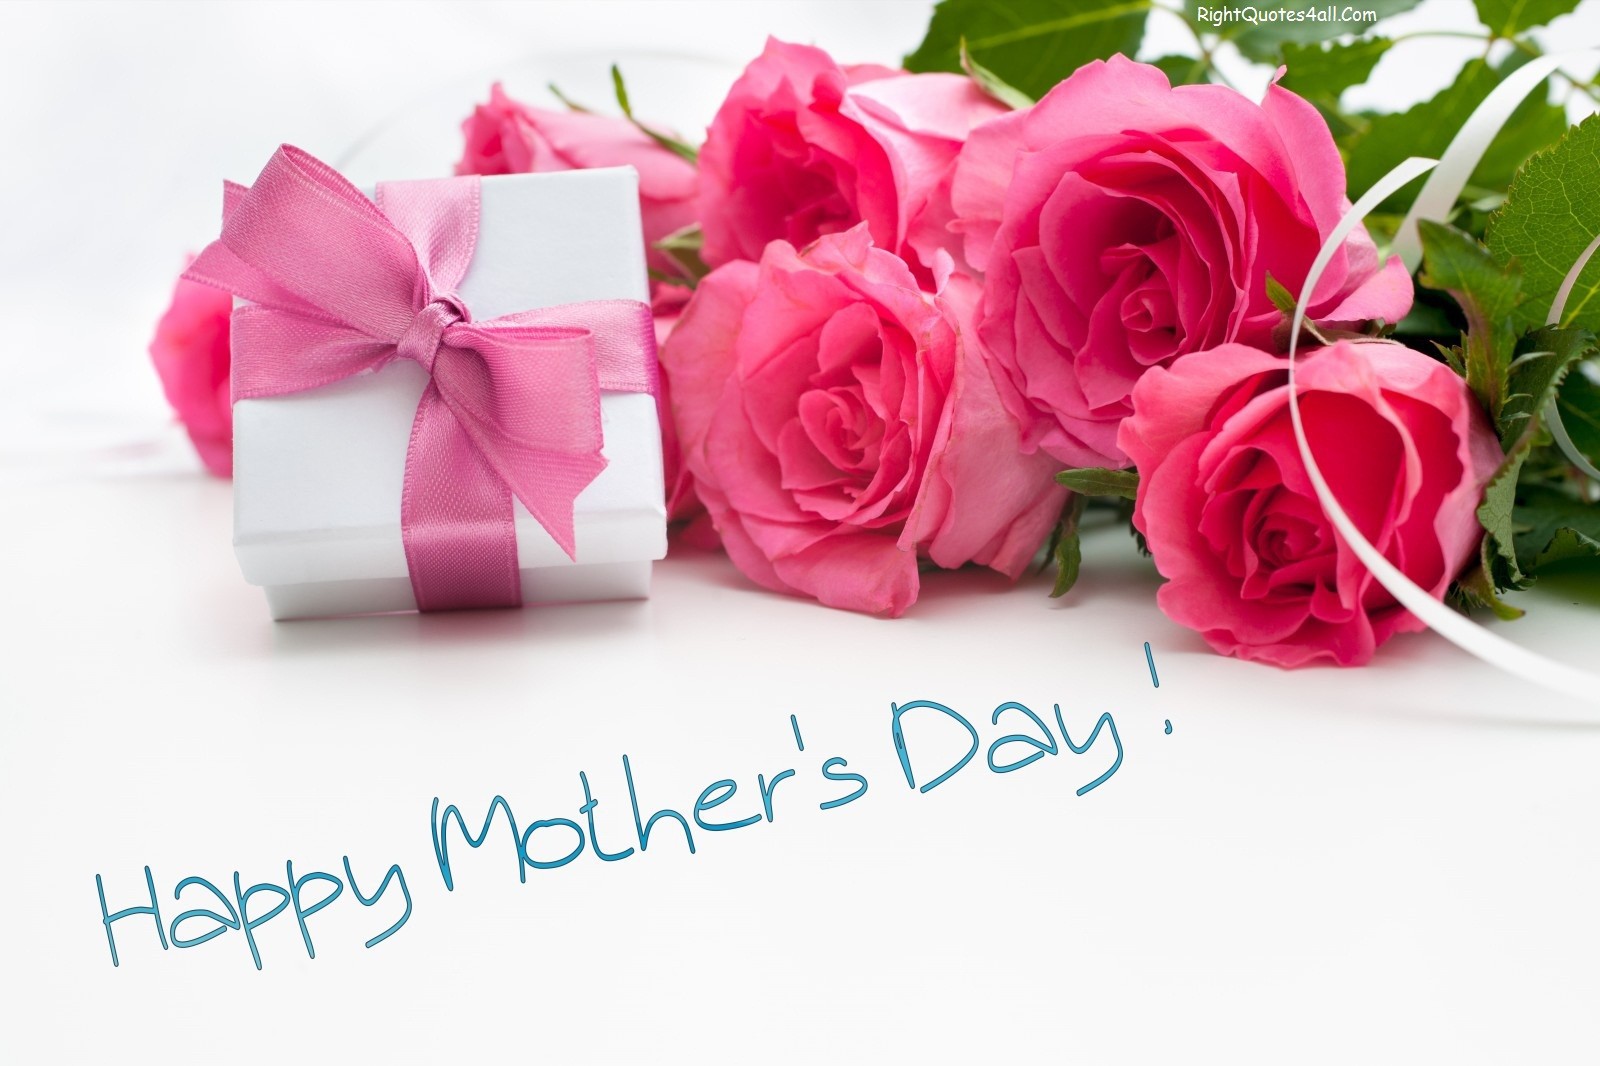 HAPPY MOTHER’S DAY WISHES